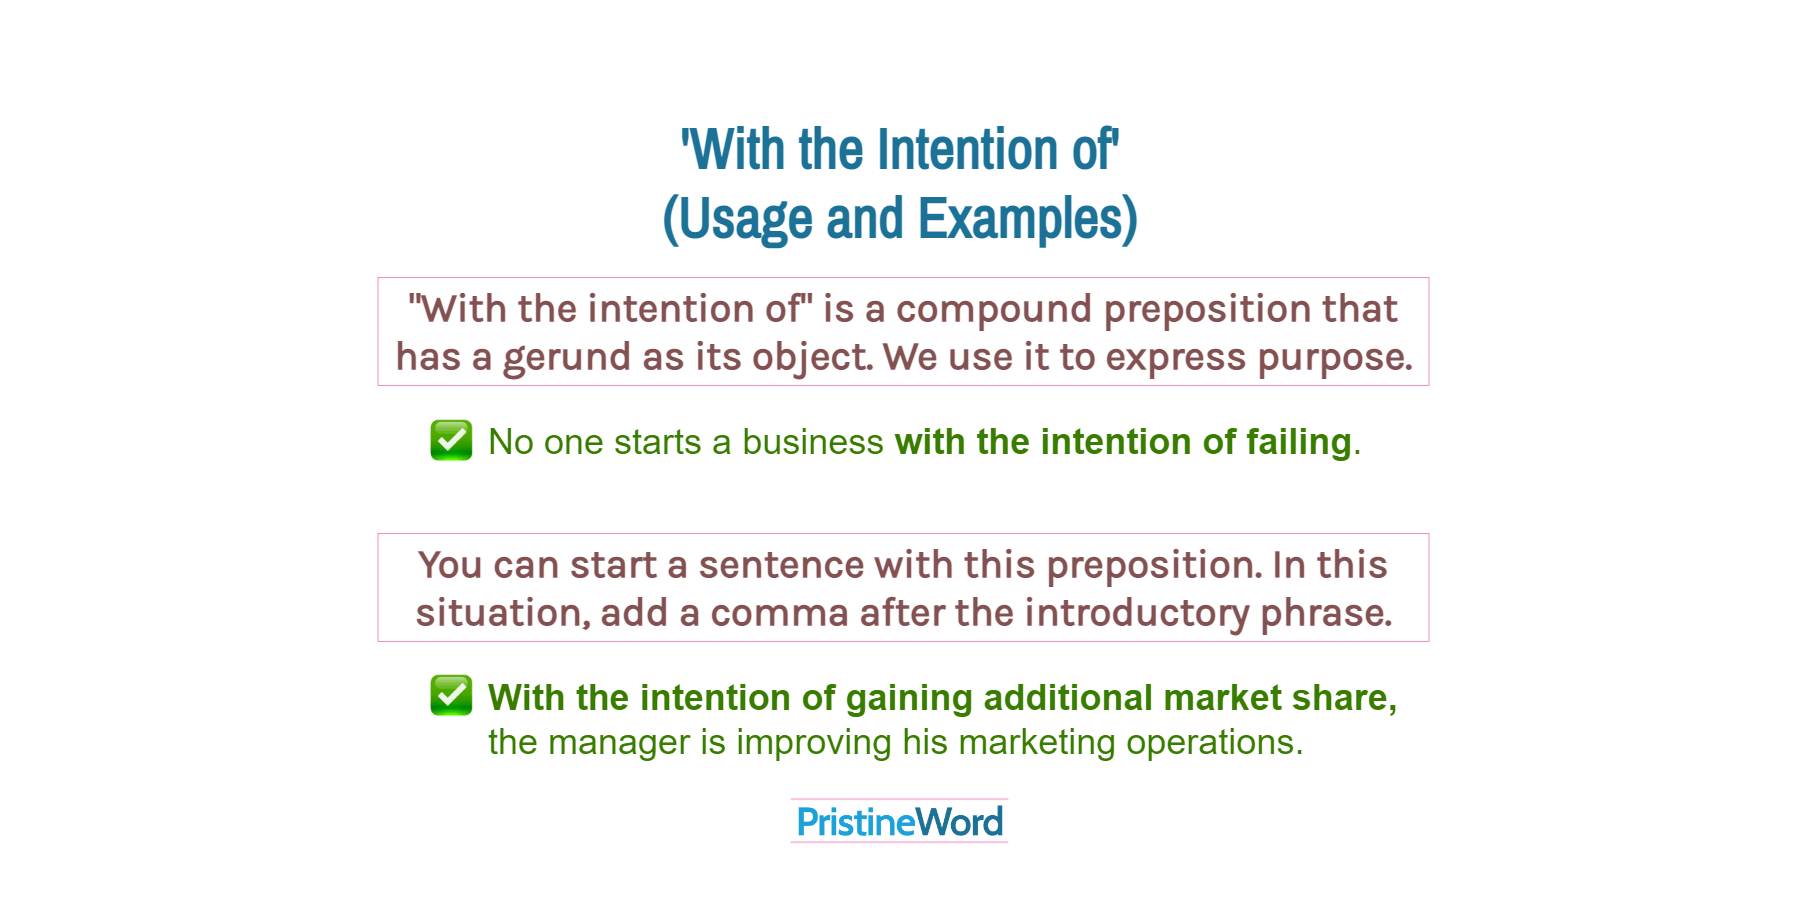 How to Use 'With the Intention of'